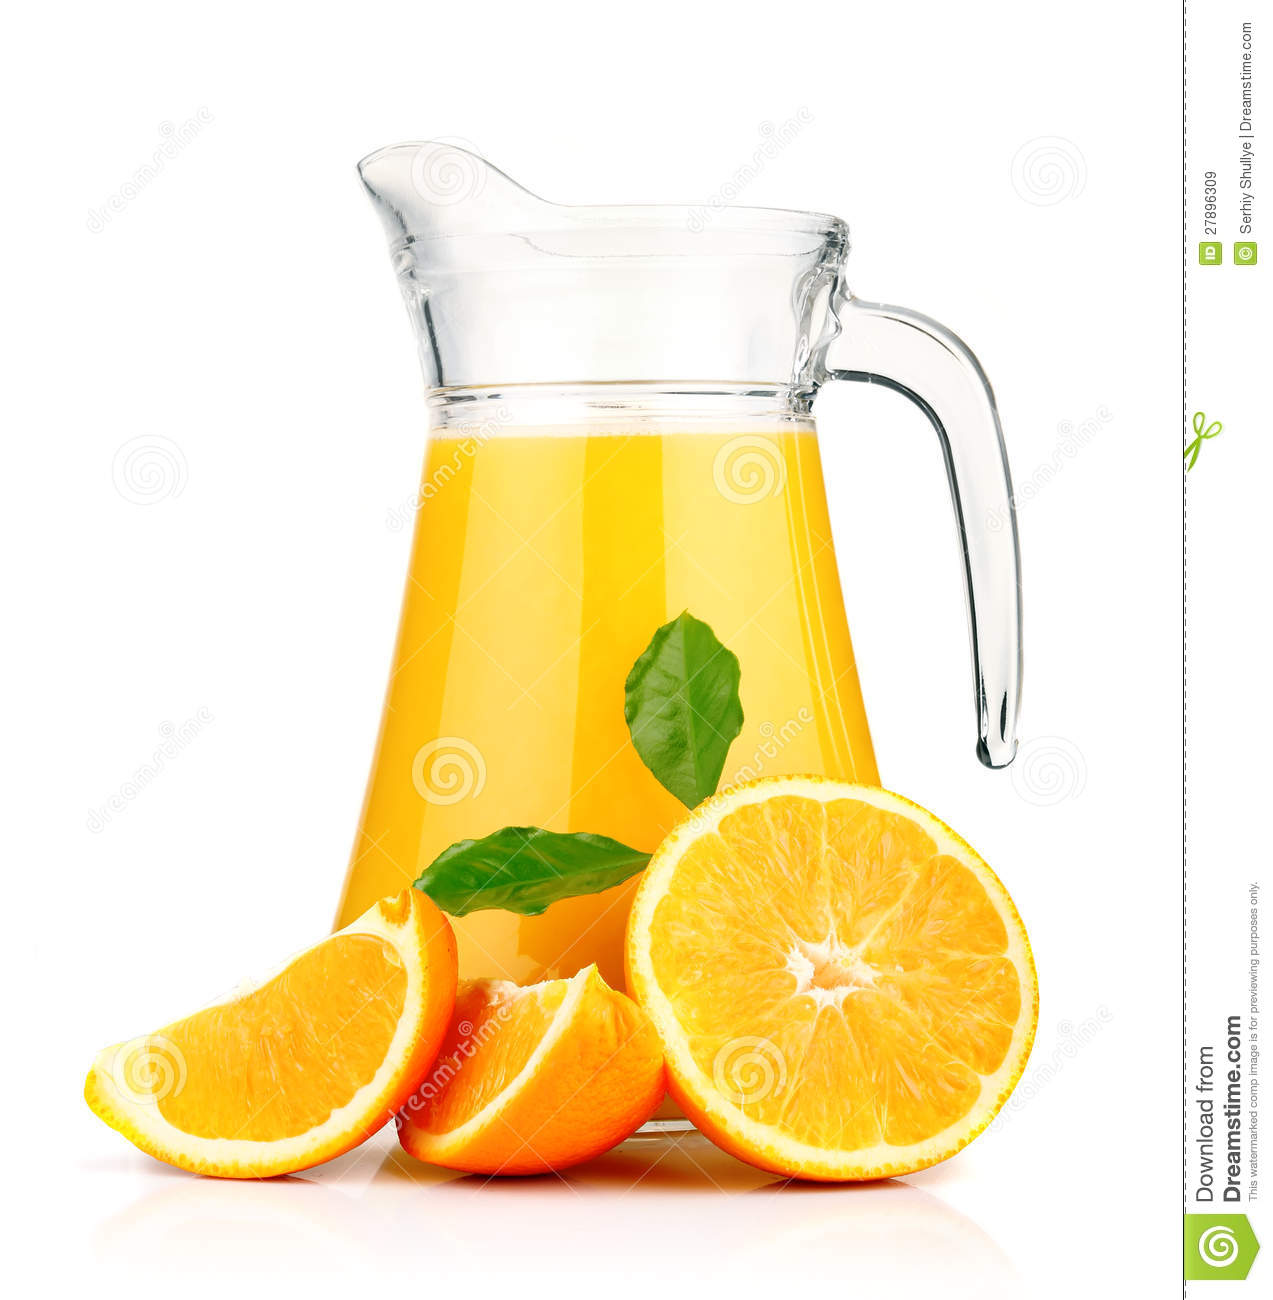 Orange Juice In Pitcher And Oranges  Royalty Free Stock Images   Image